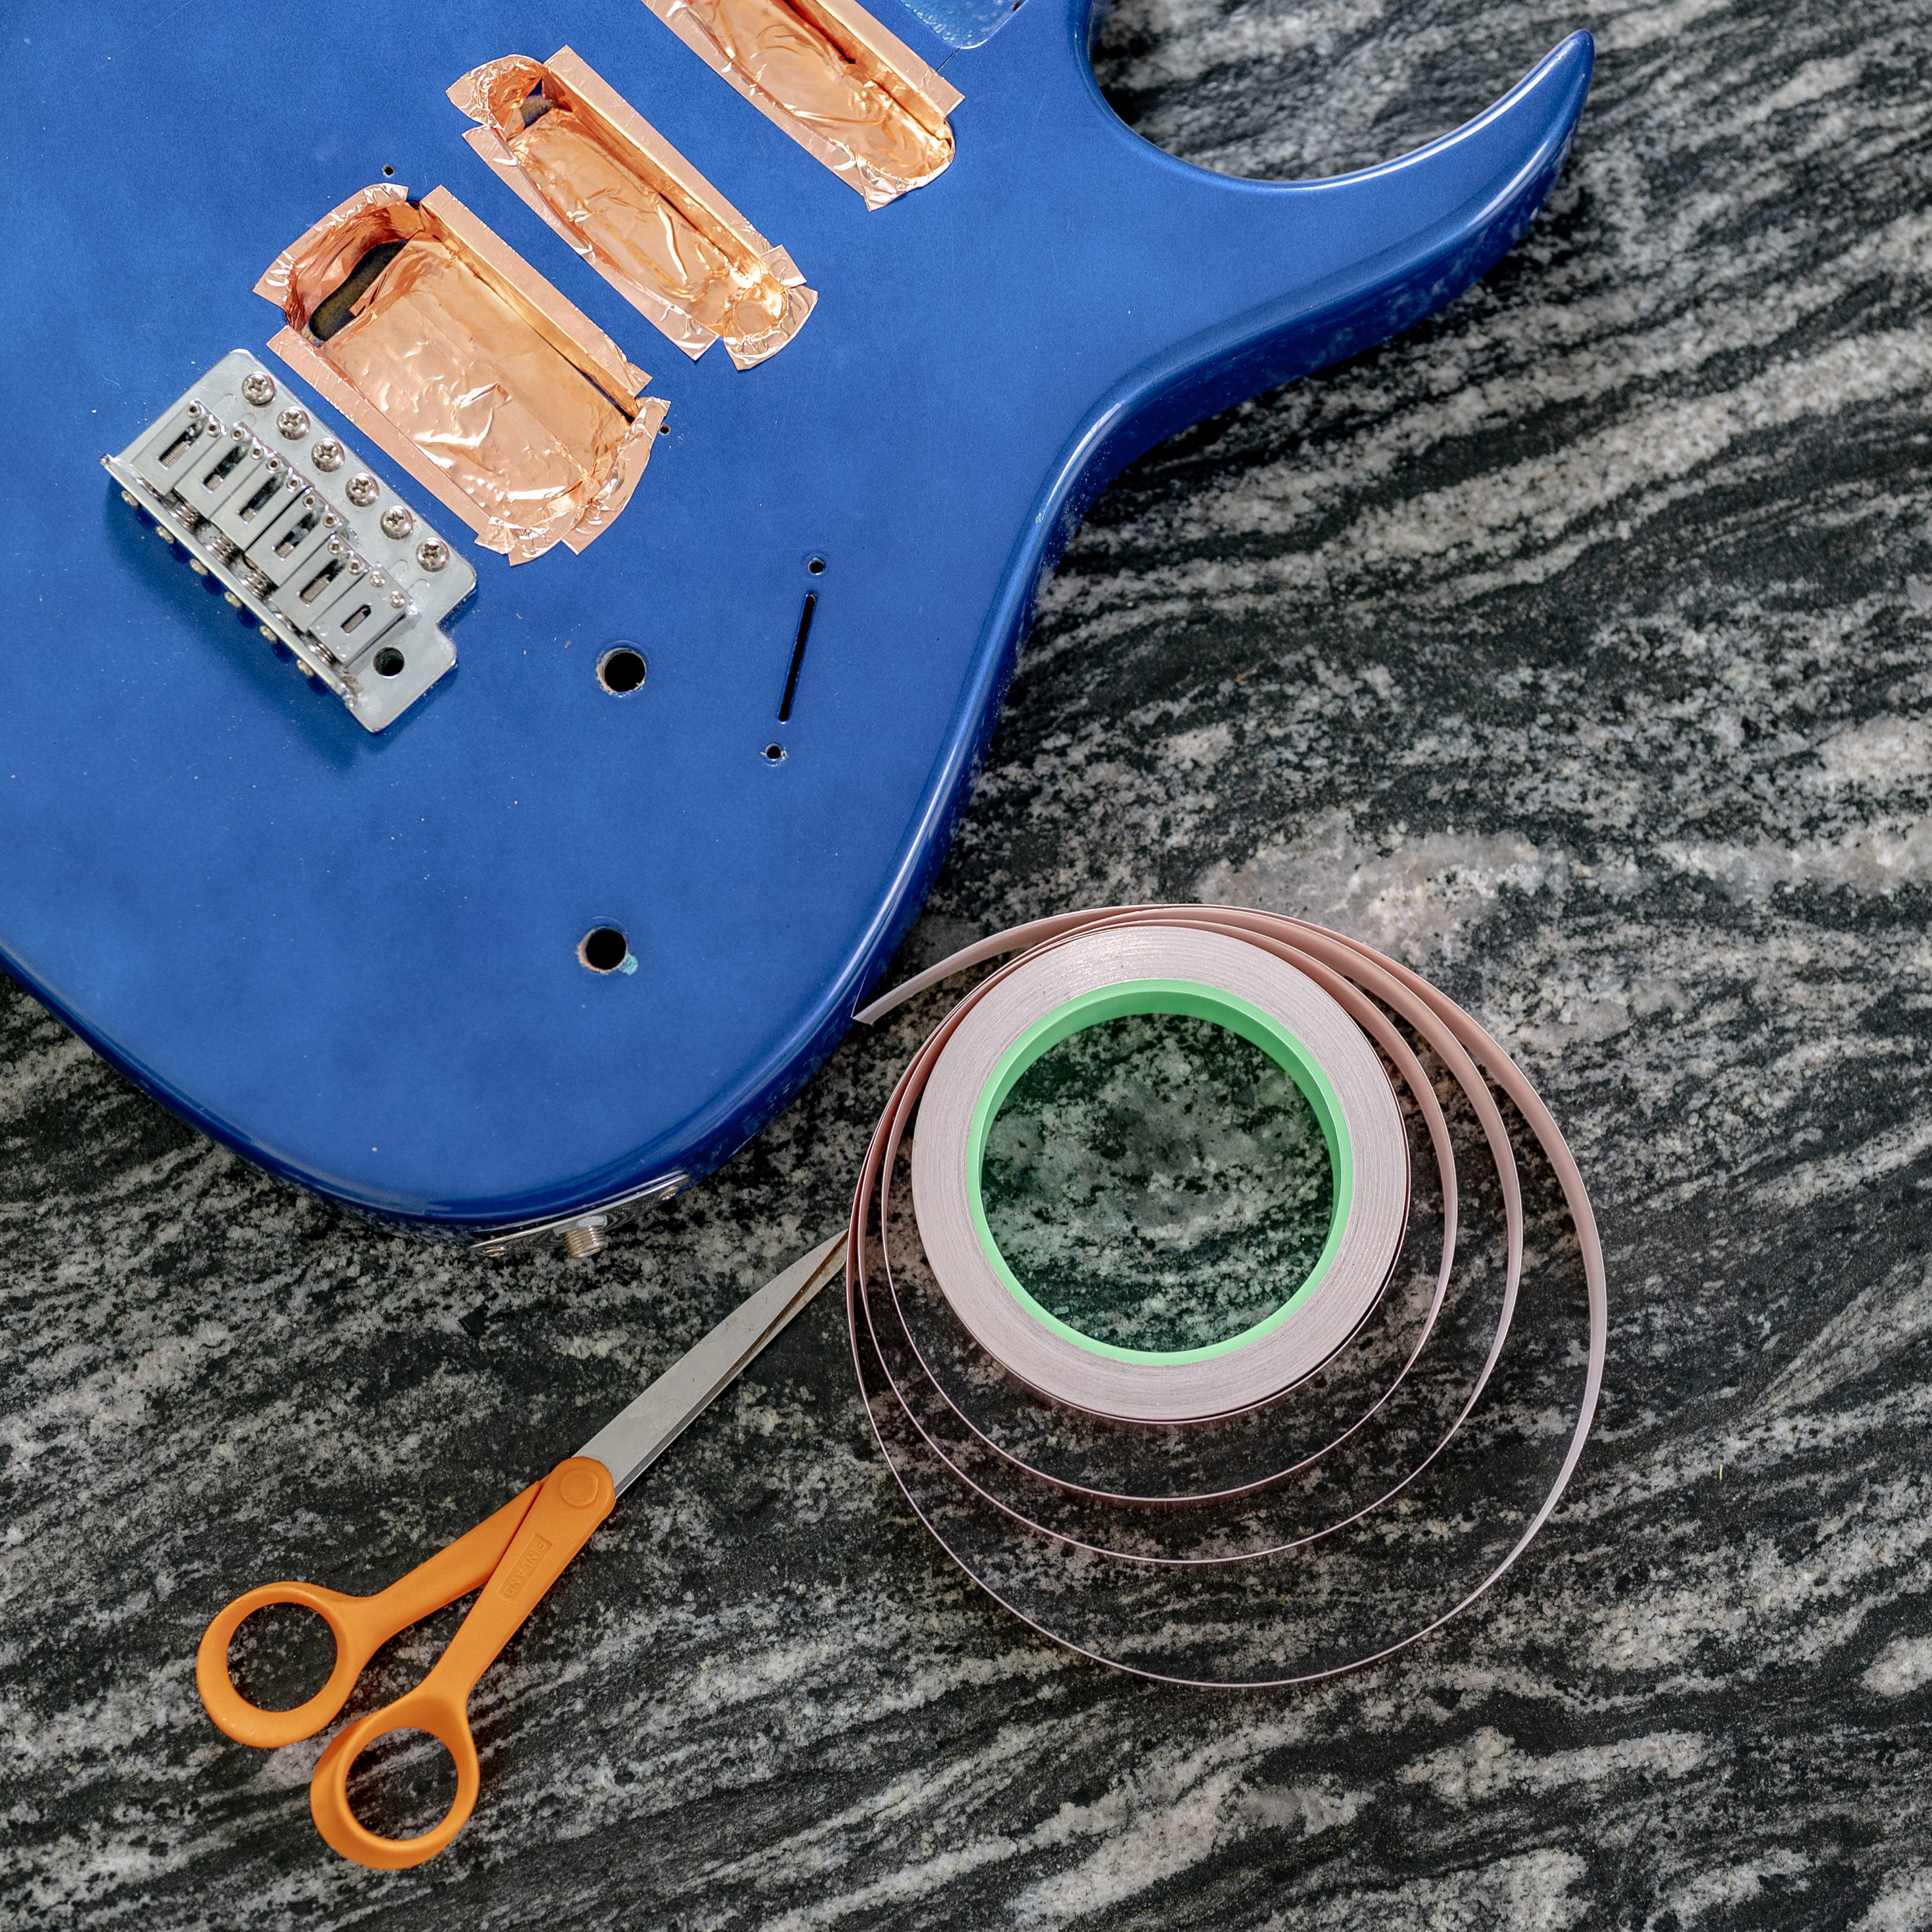 Zehhe Copper Foil Tape with Double-Sided Conductive - EMI